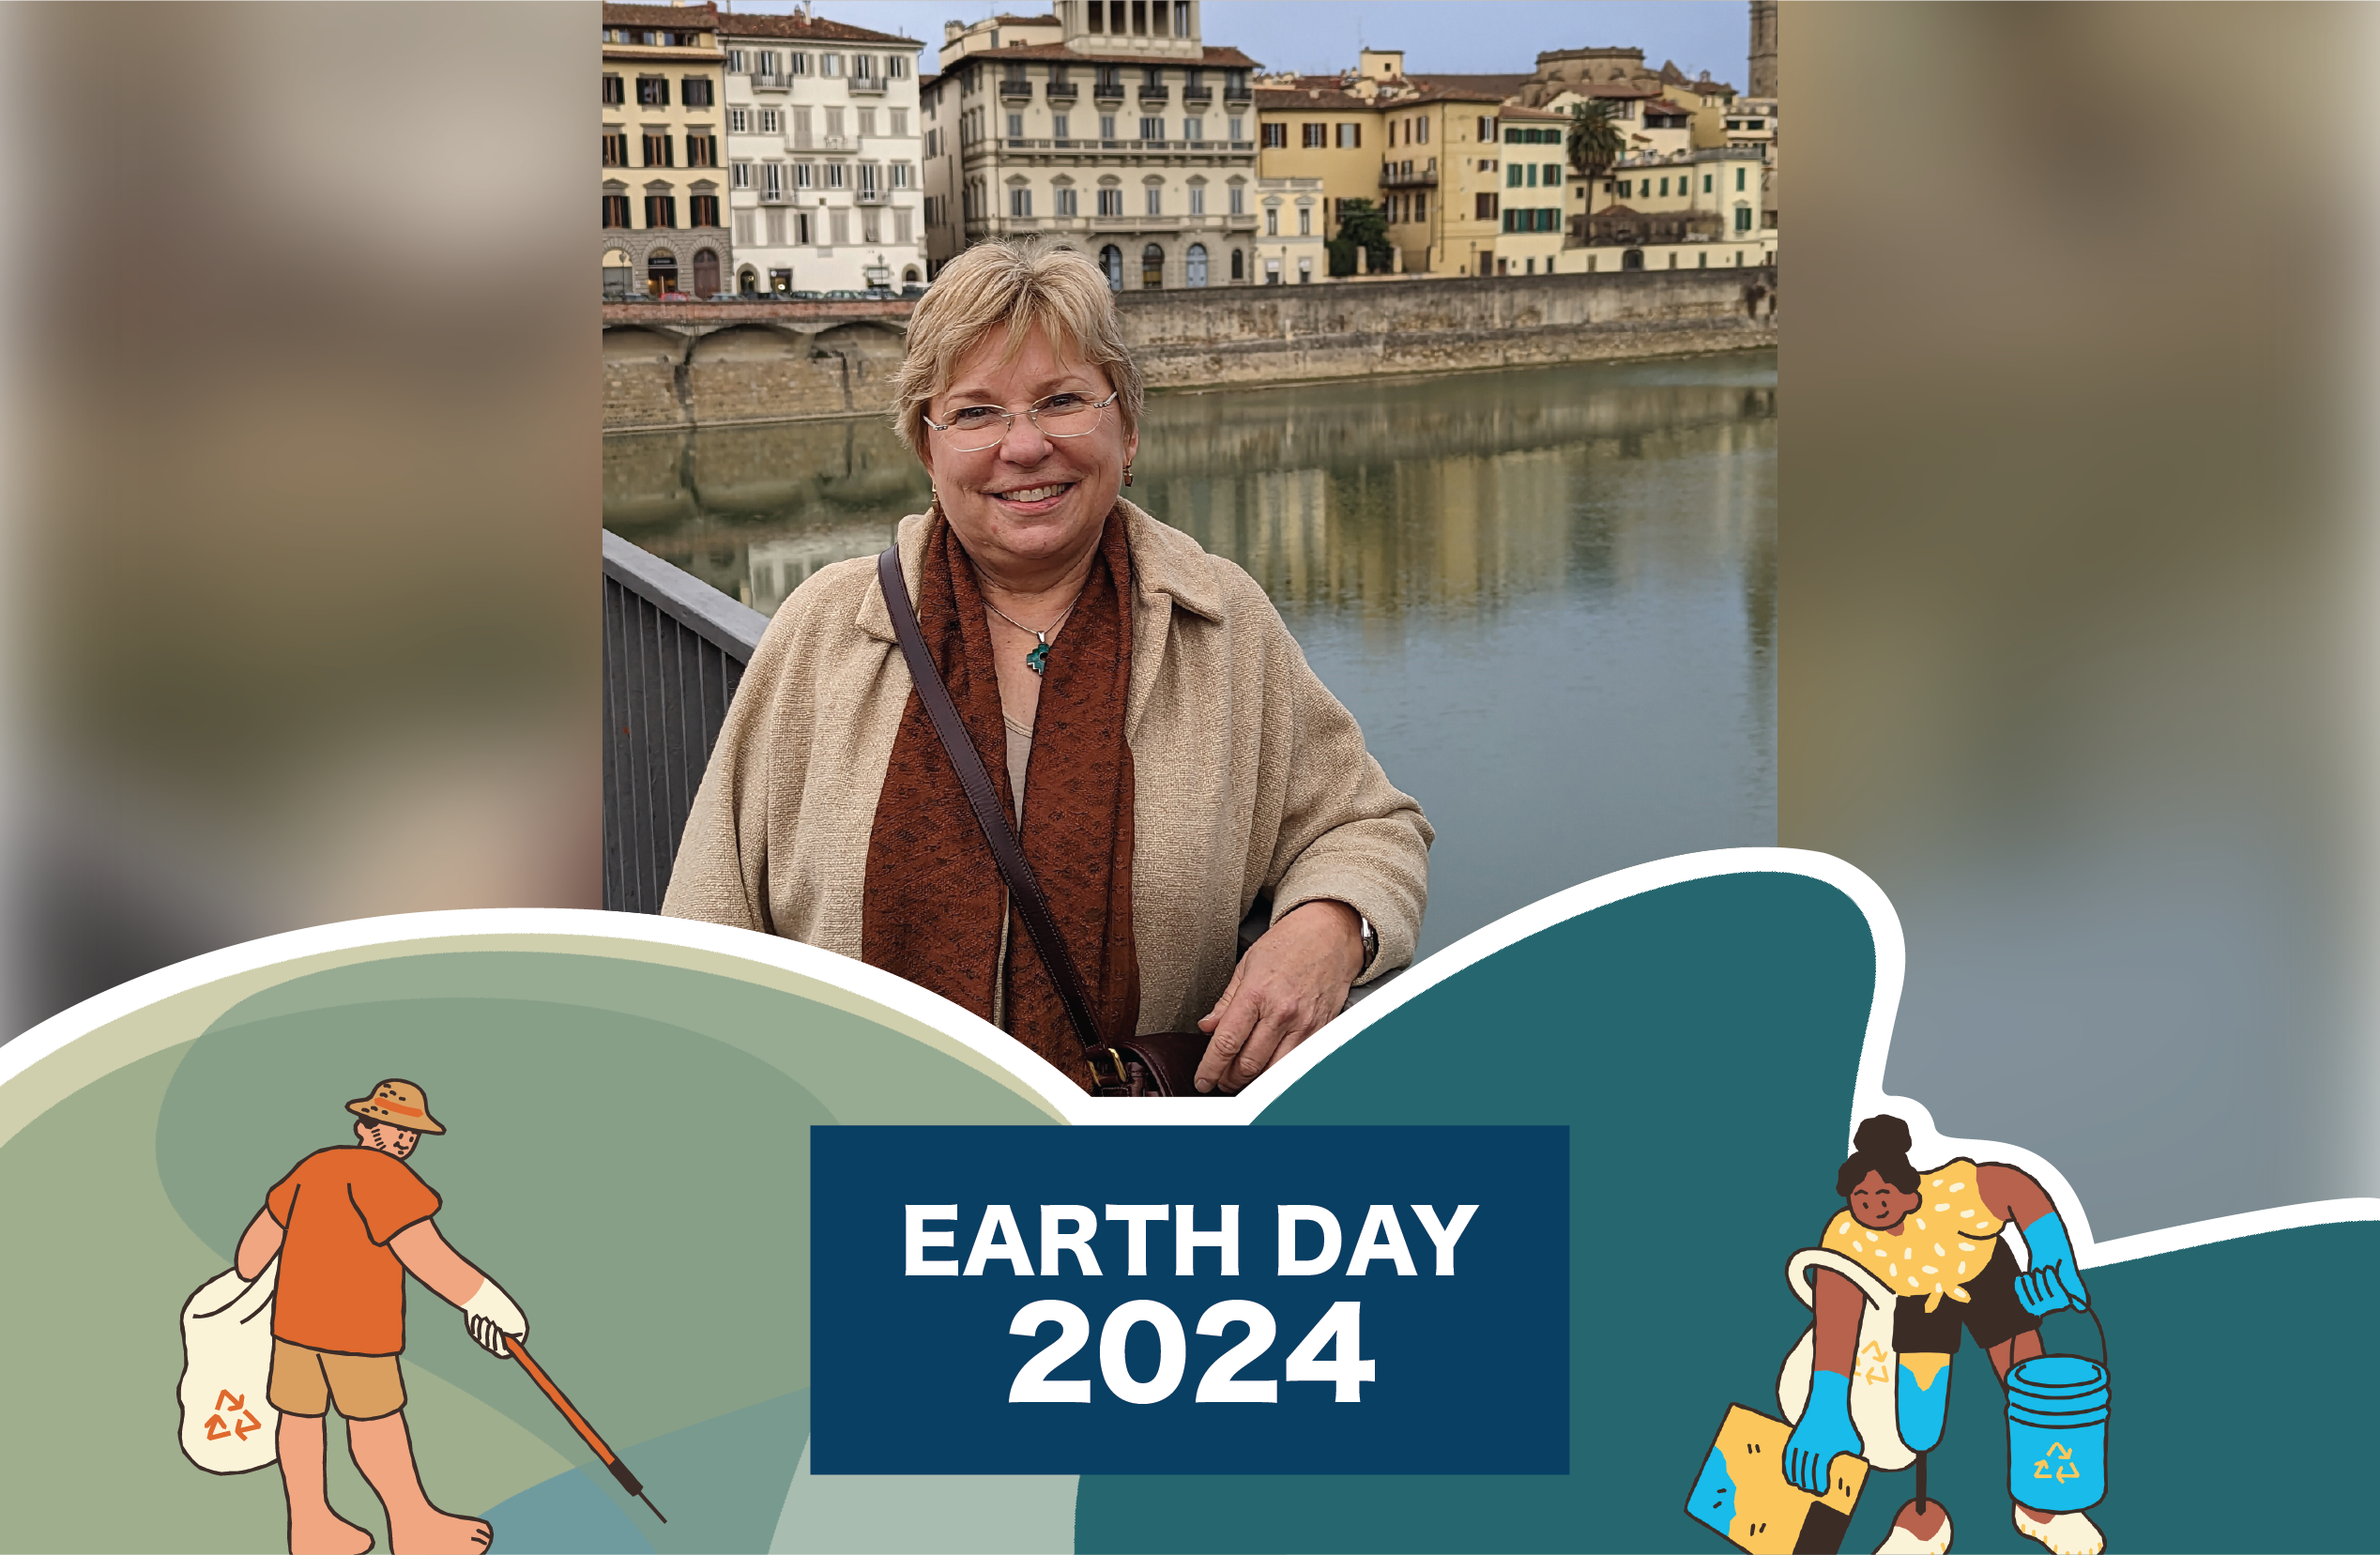 Woman on bridge over water and Earth Day 2024 graphic